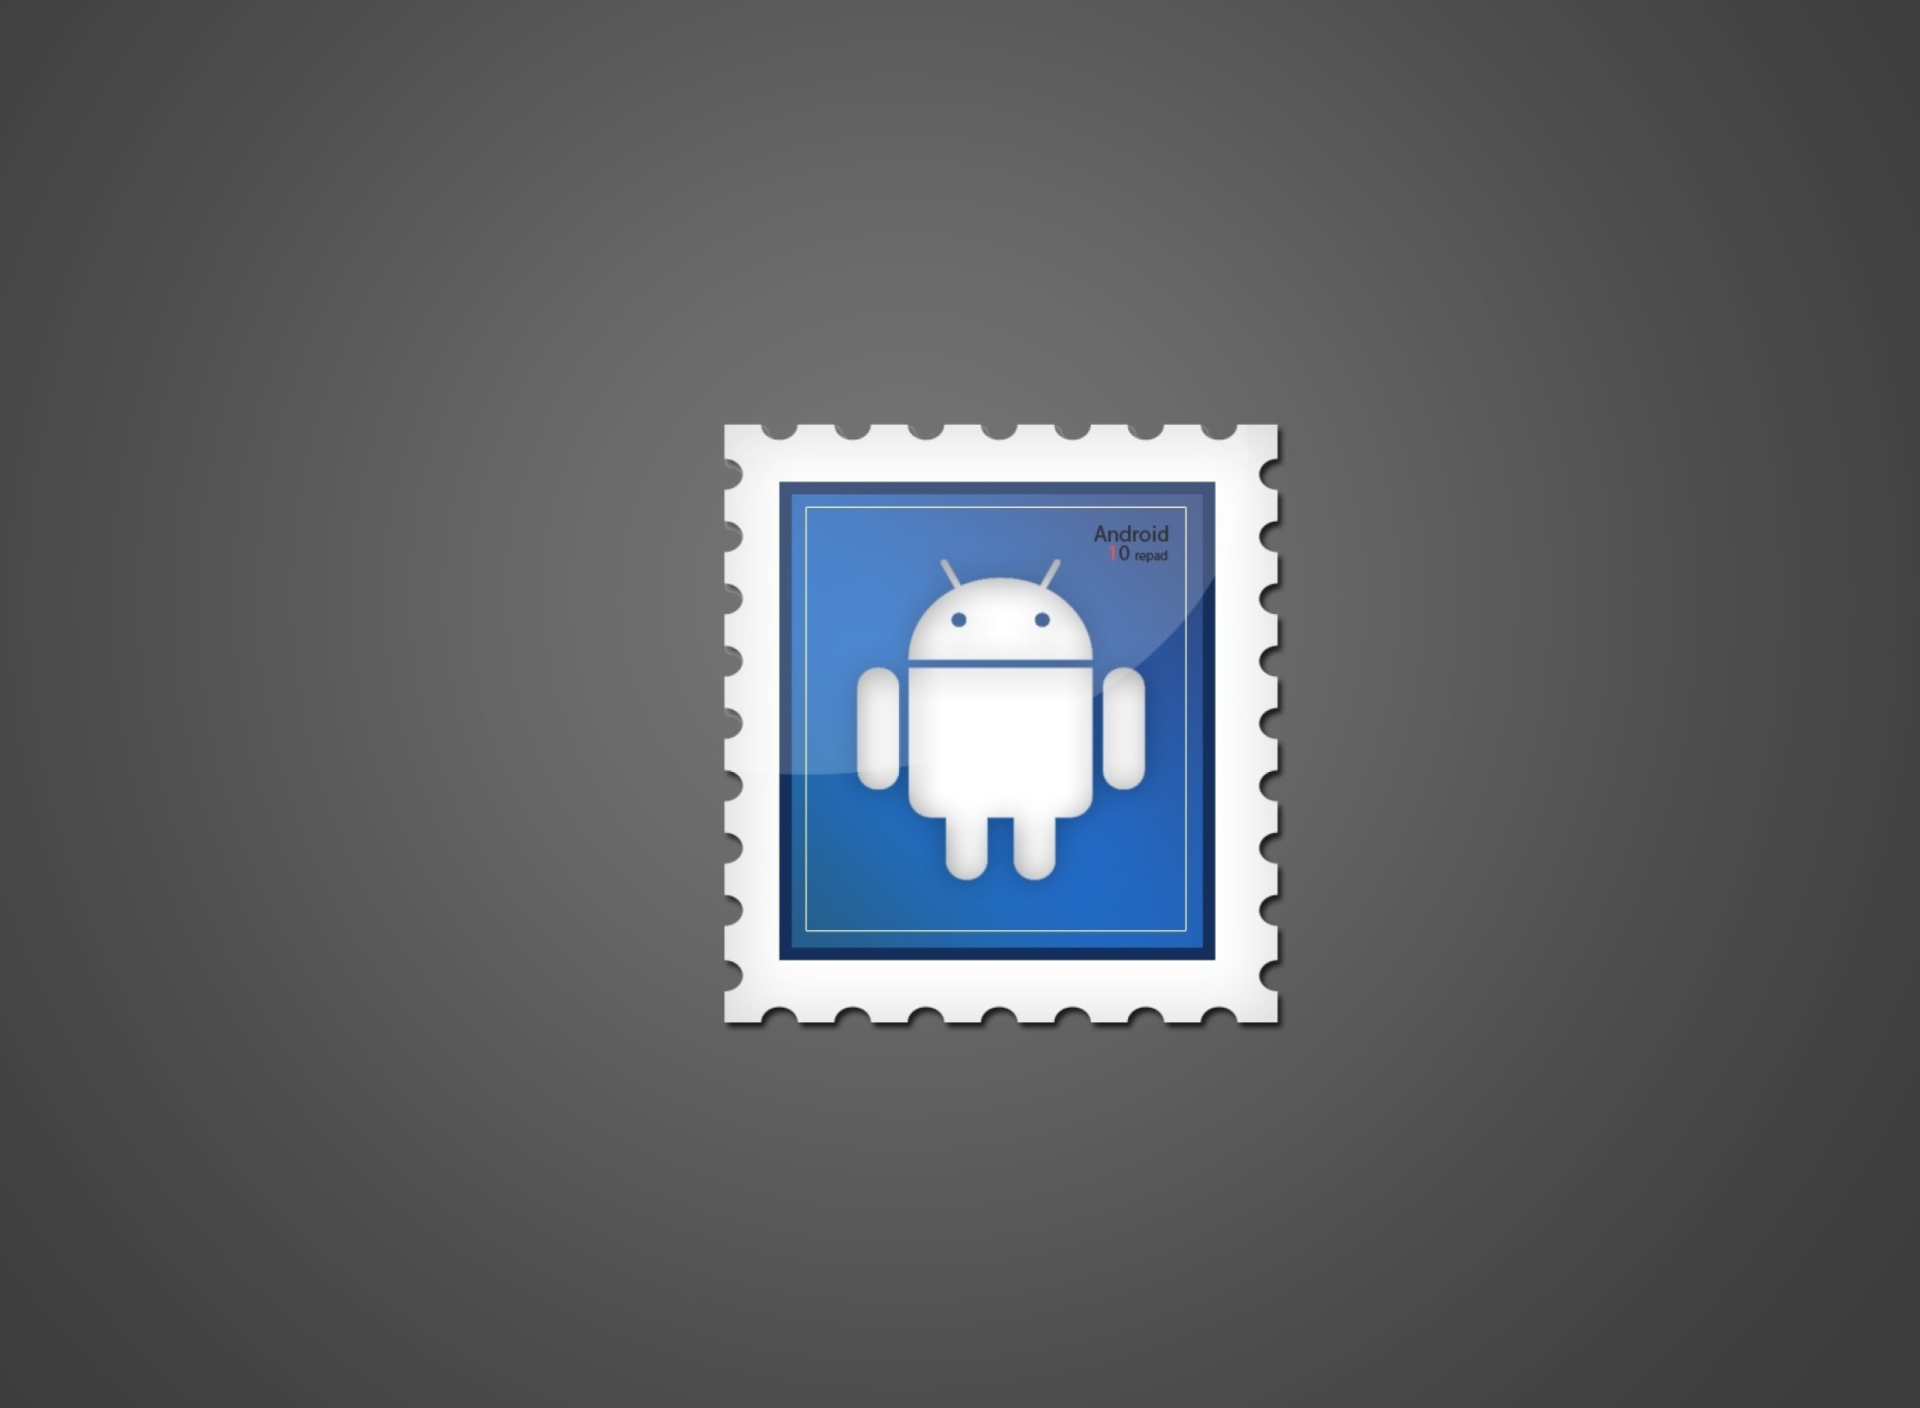 Android Postage Stamp screenshot #1 1920x1408